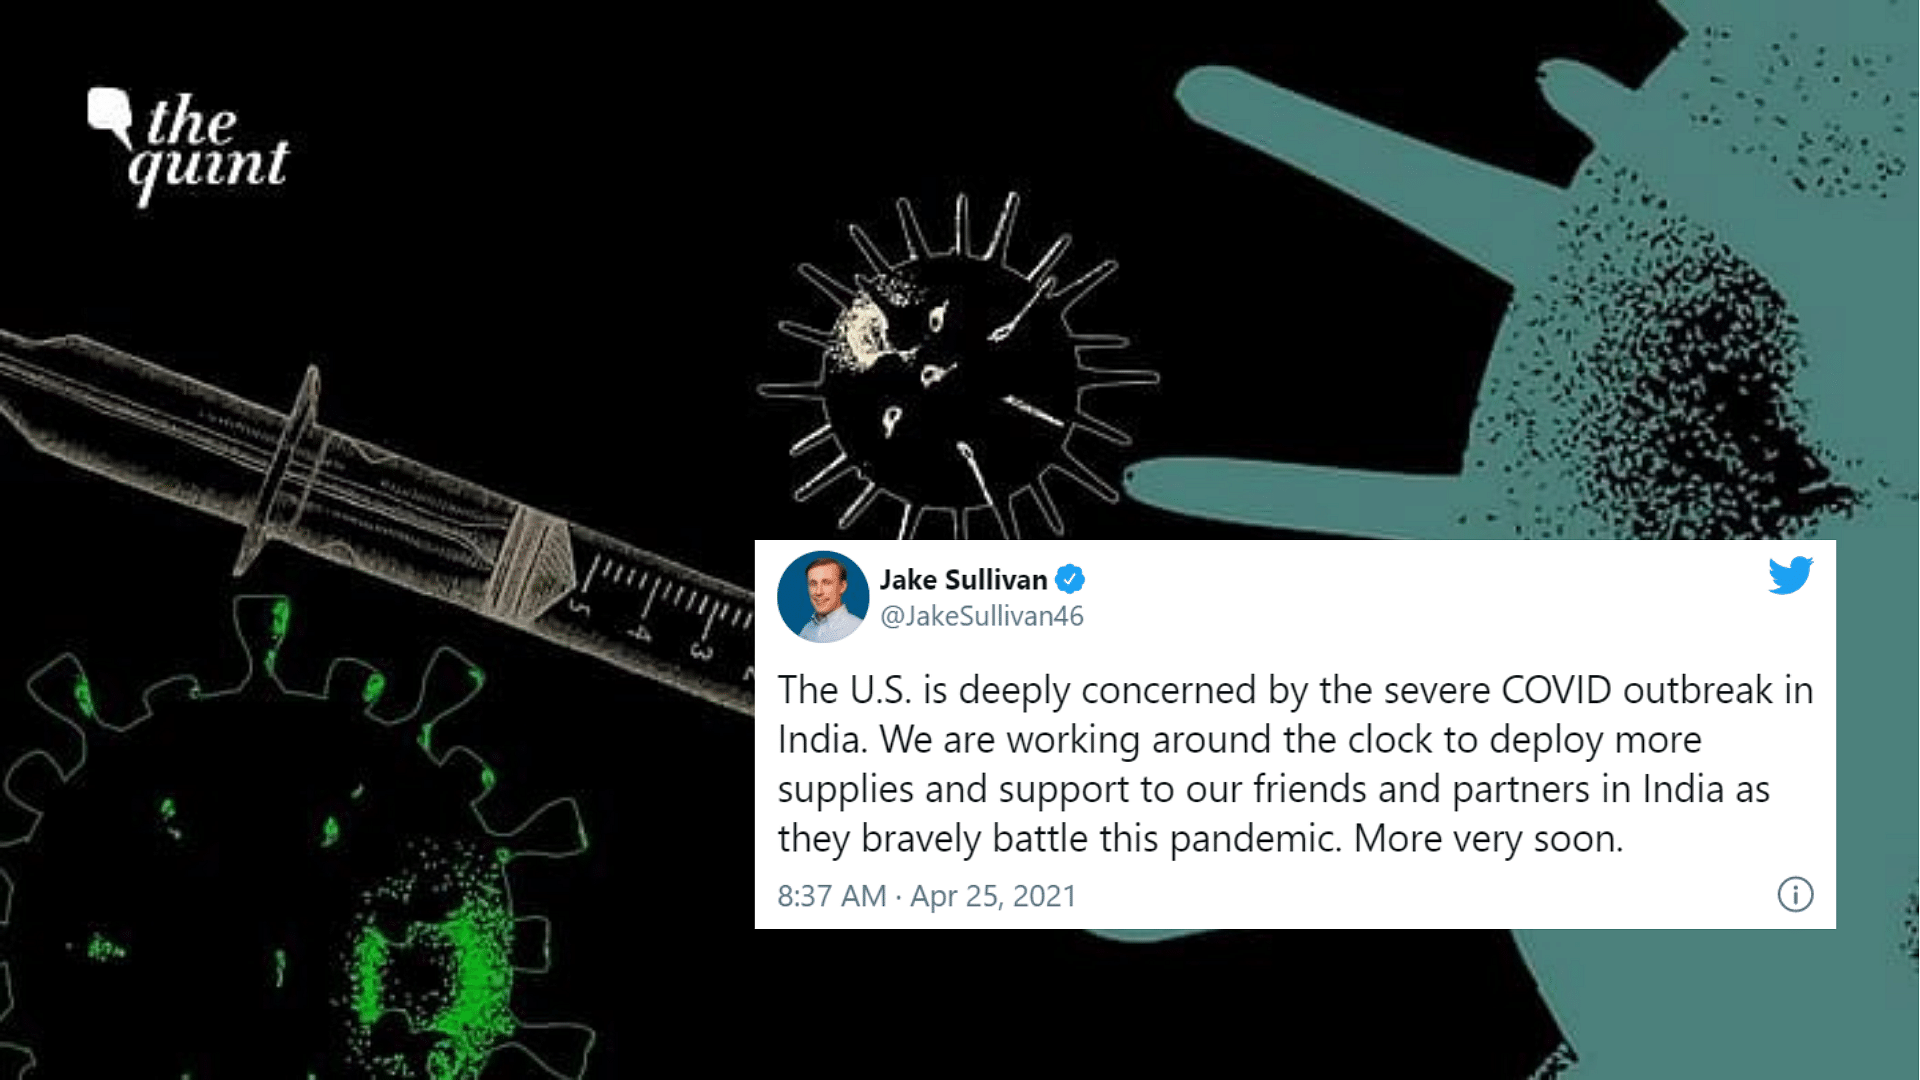 White House National Security Advisor Jake Sullivan and Secretary of State Antony Blinken tweeted that US was deeply concerned about the COVID outbreak in India.